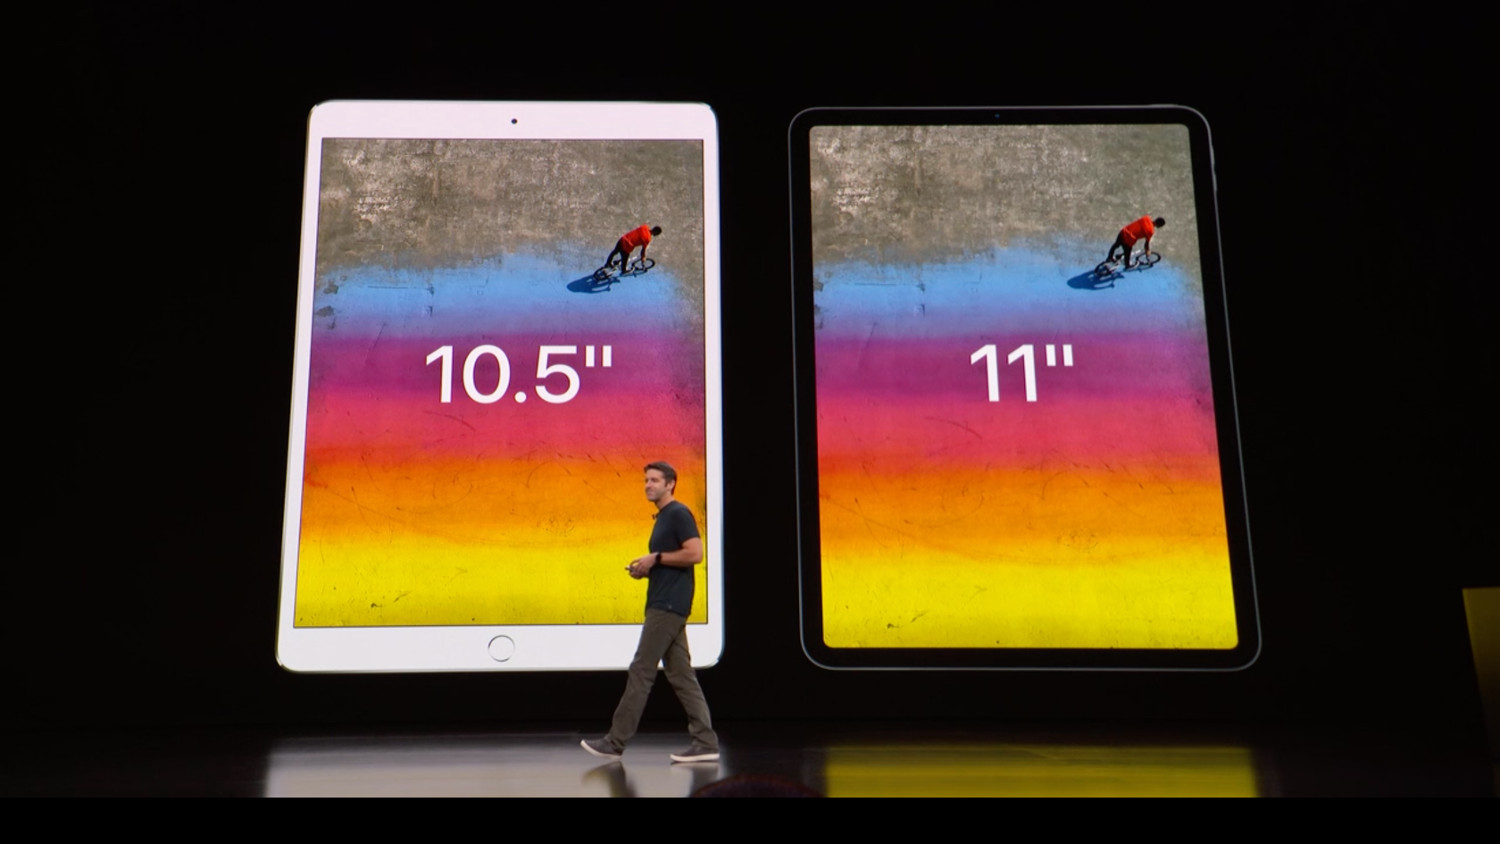 The end of the presentation, Apple presented the new iPad Pro, MacBook Air and Mac mini